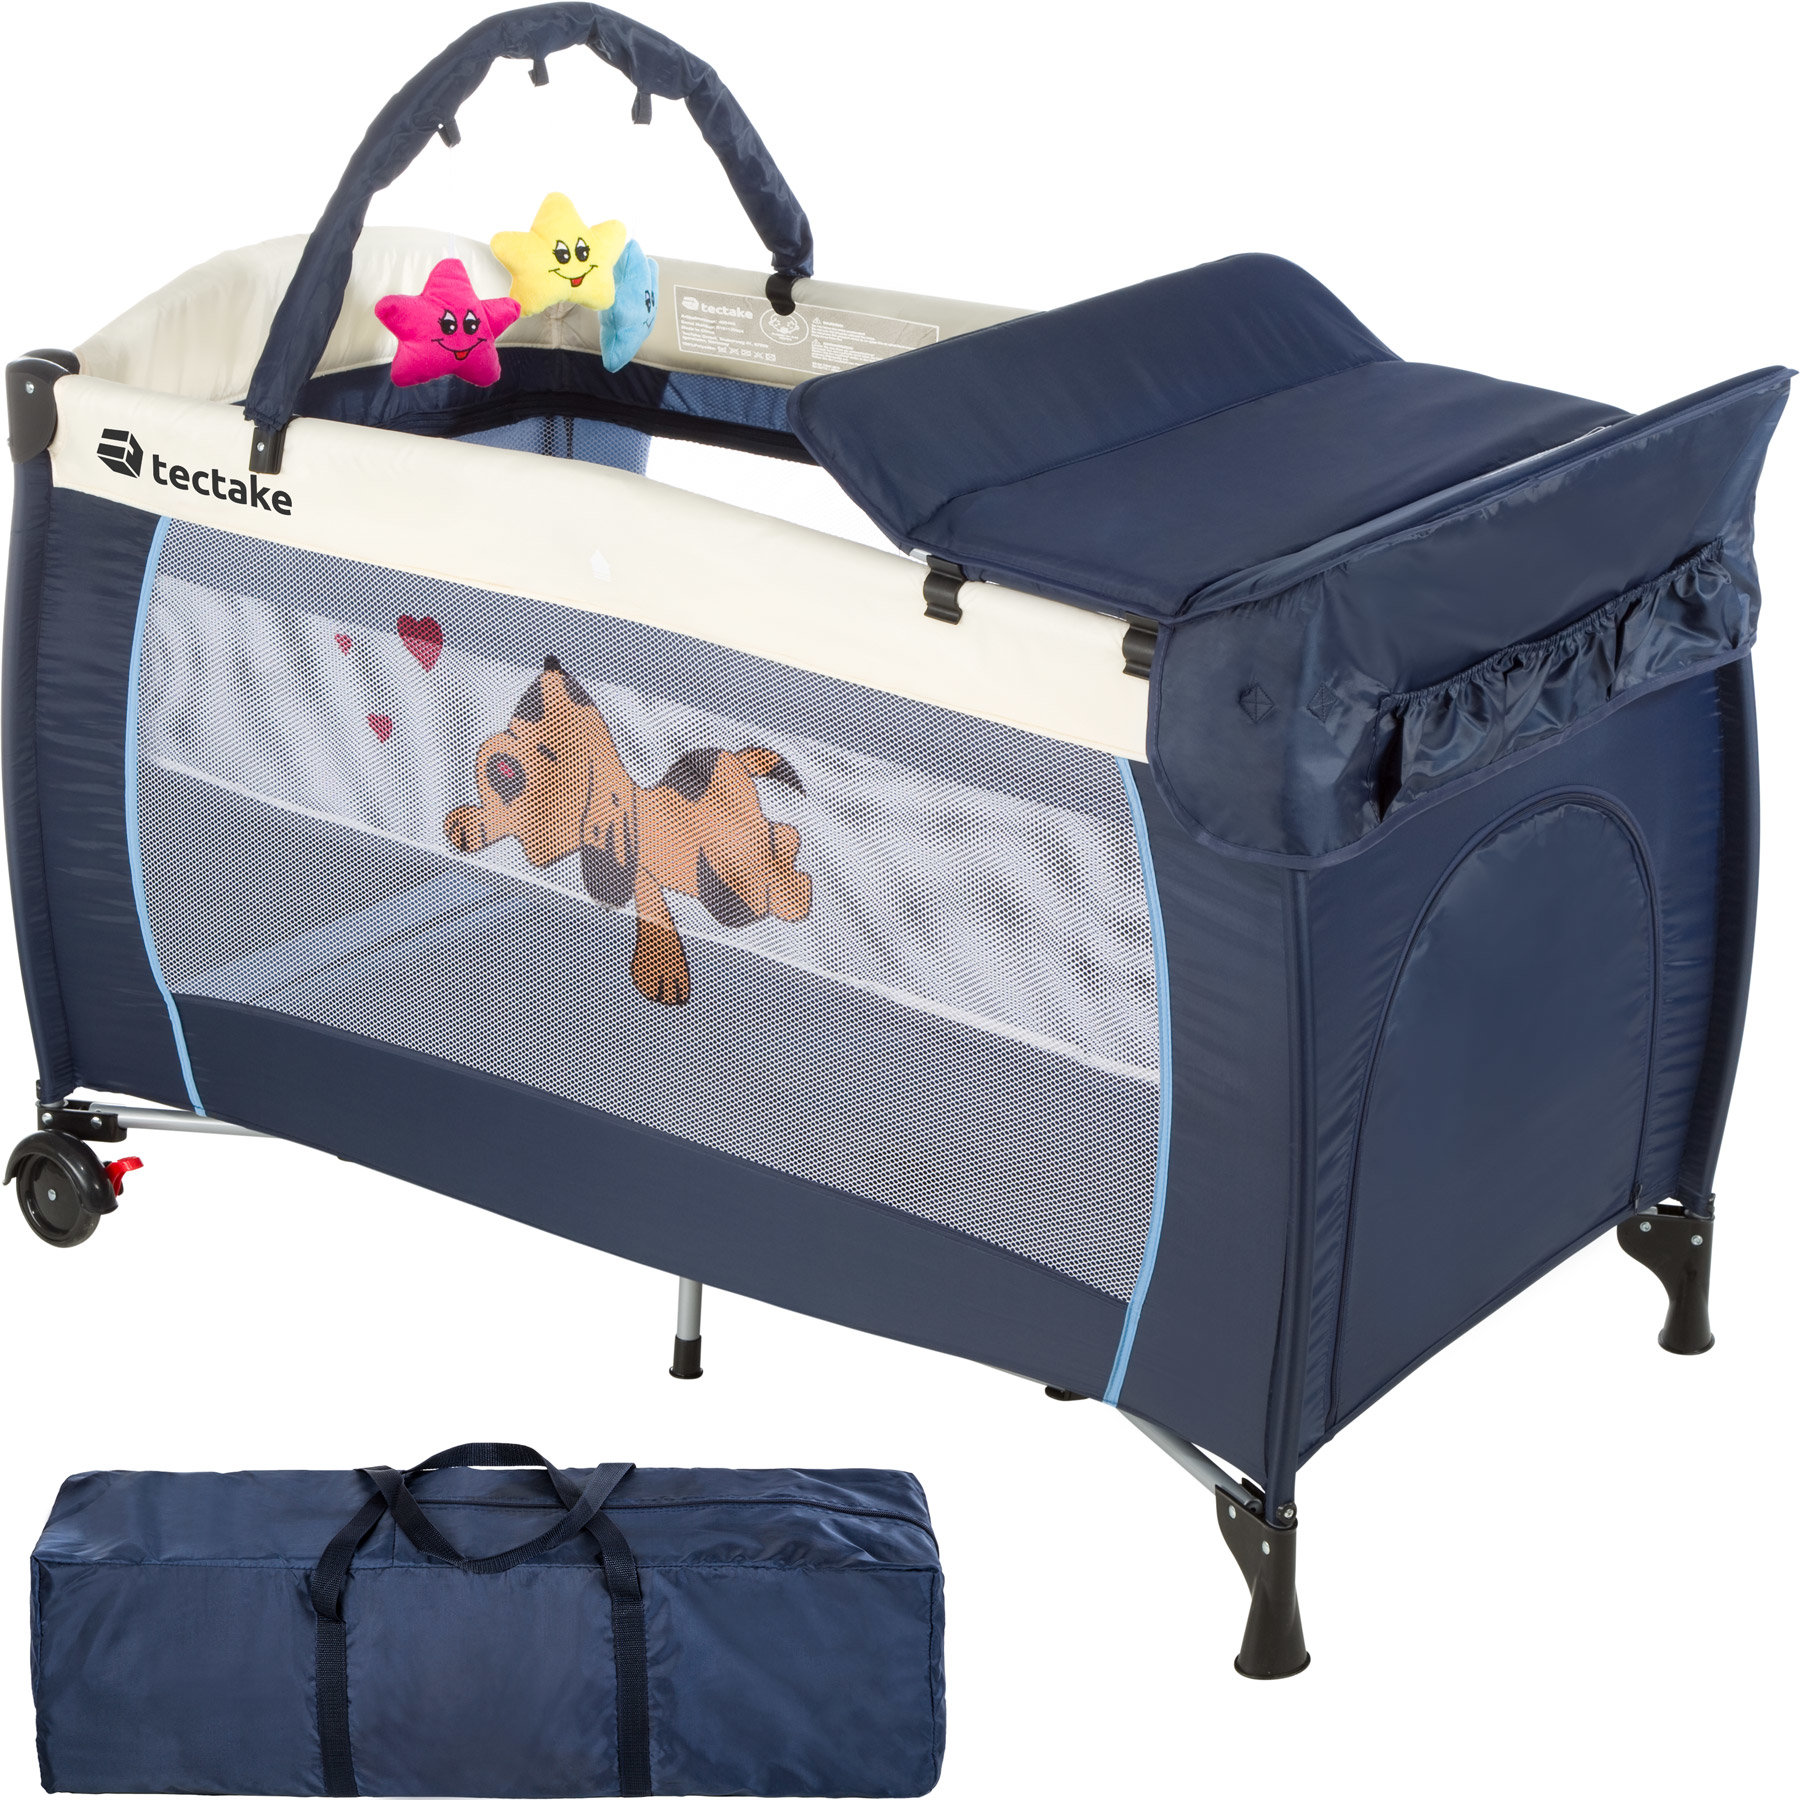 tectake Travel cot dog with changing mat and play bar - cot bed, baby travel cot, pop up travel cot - blue